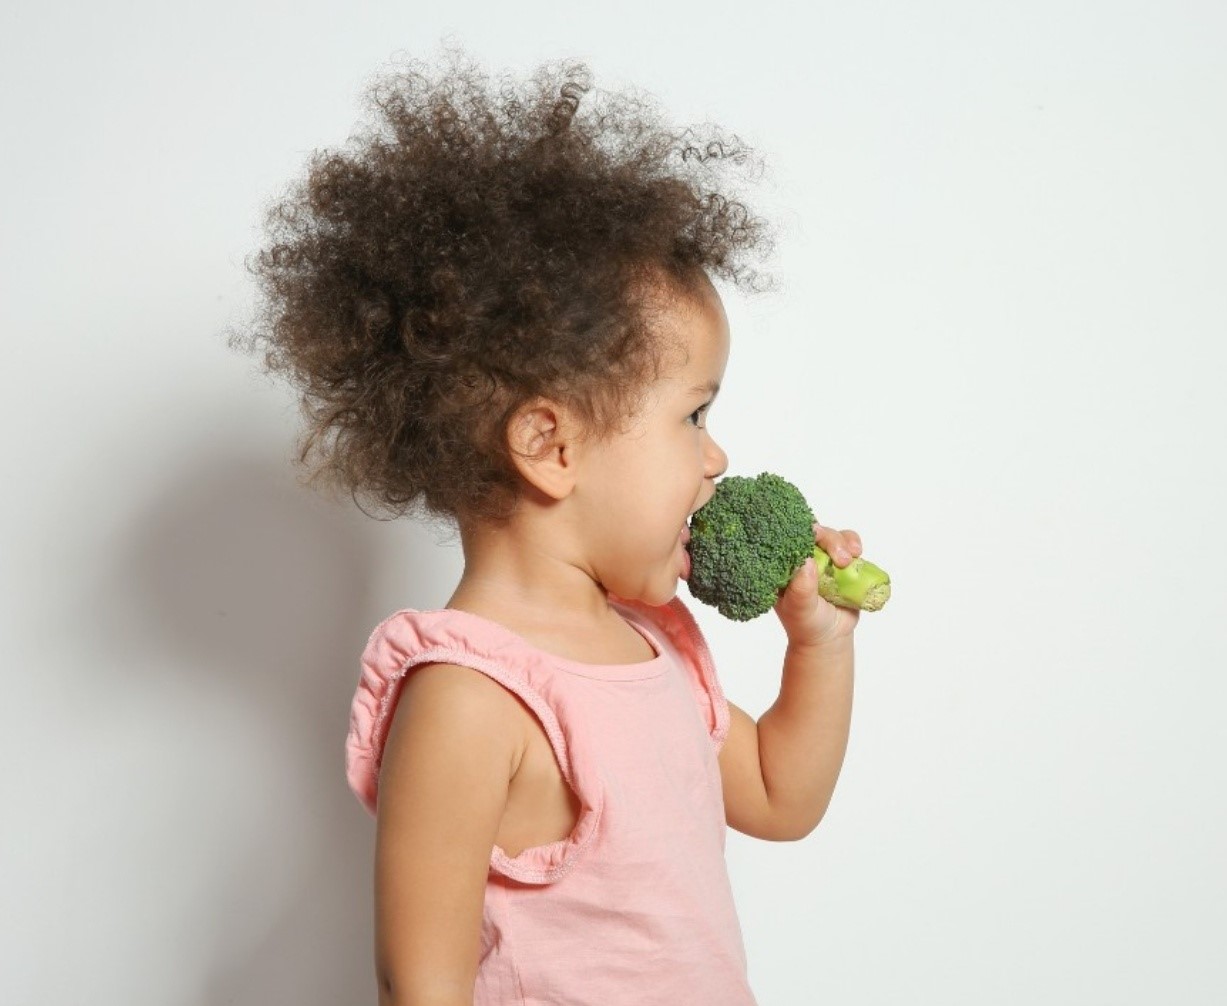 See & Eat: Free eBooks to Help Children Love Vegetables